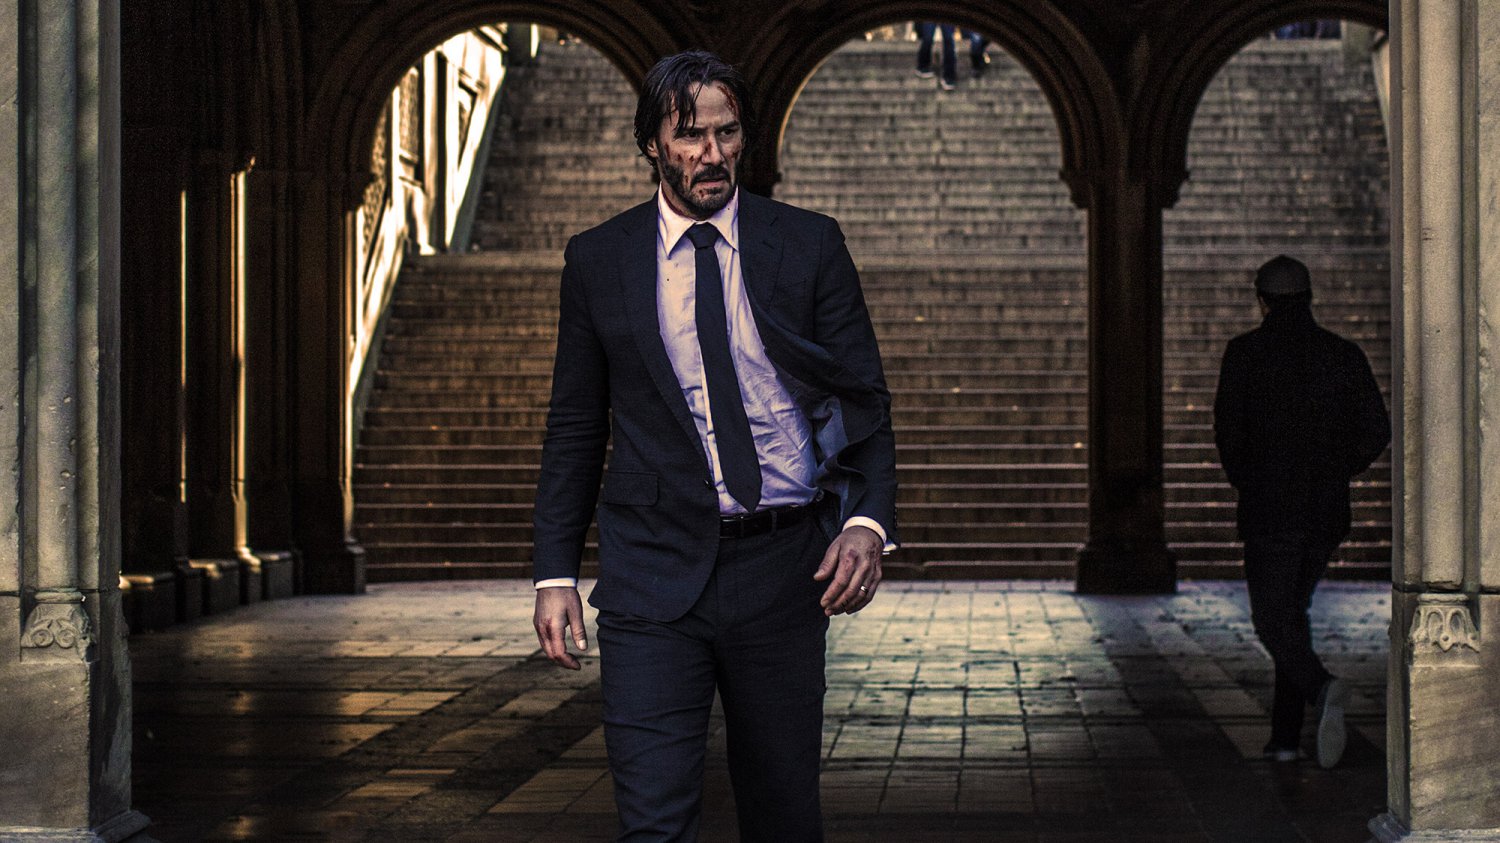 John Wick 2 Keanu Reeves 13"x19" (32cm/49cm) Polyester Fabric Poster